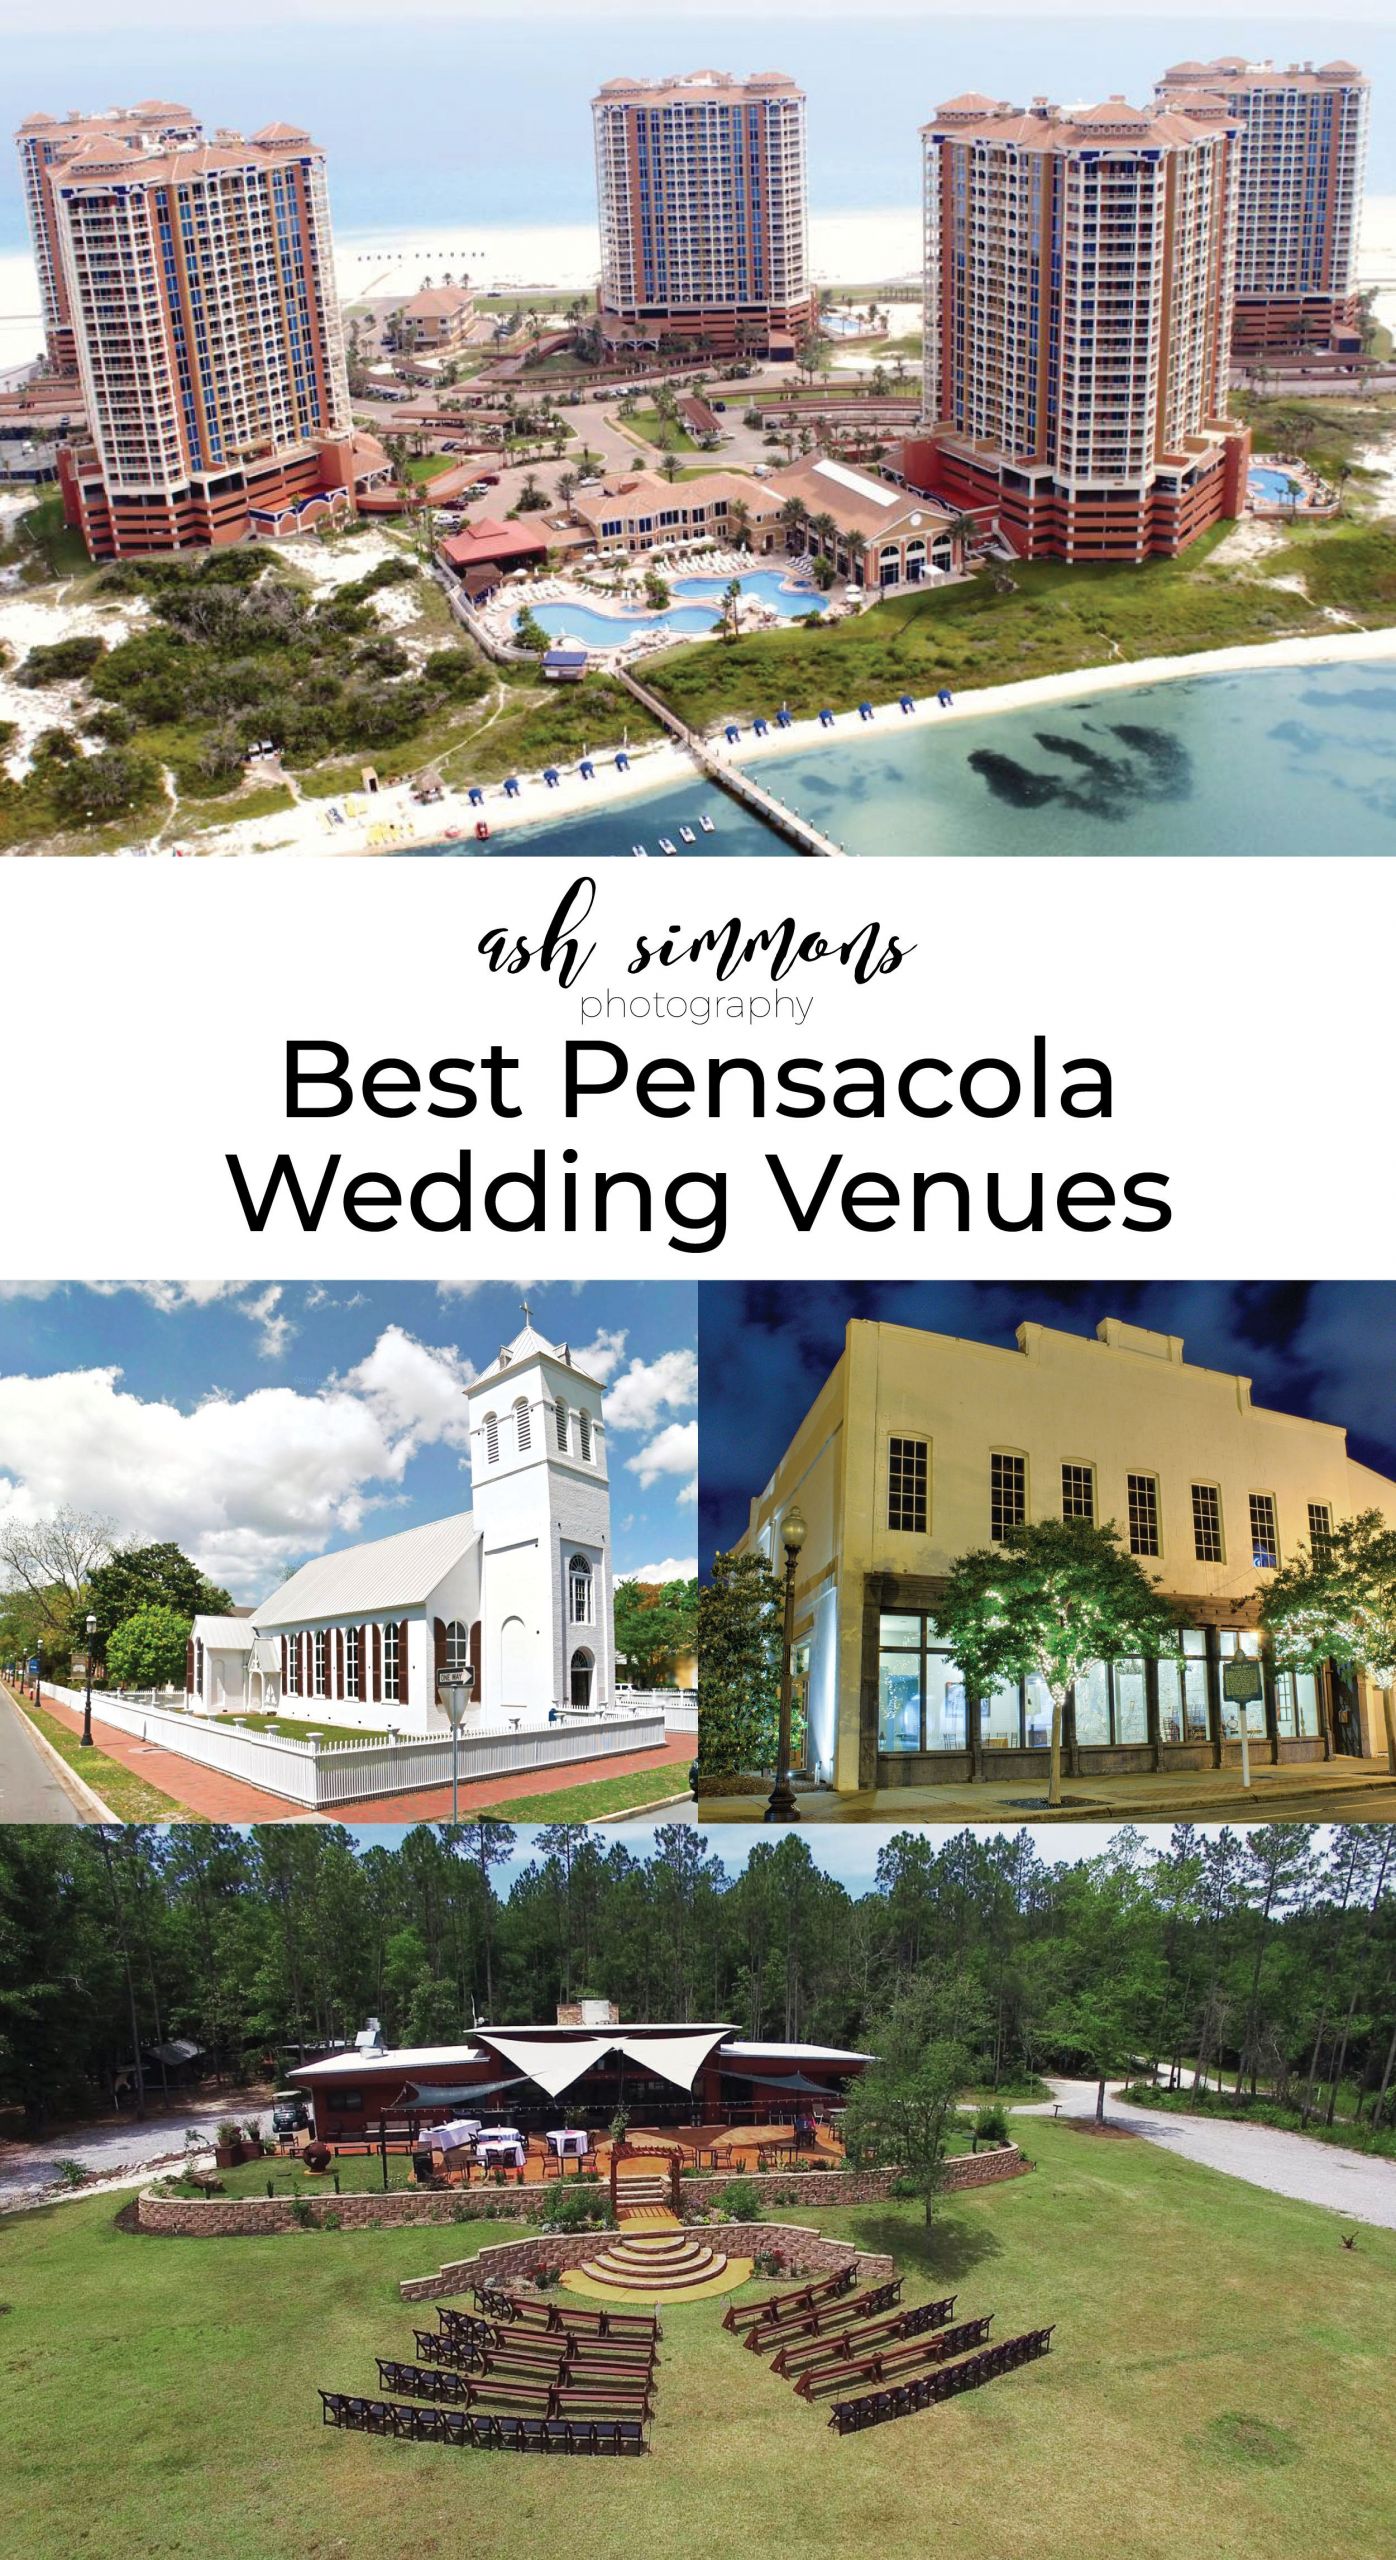 Wedding Venues In Pensacola Fl
 Check out the top wedding venues in Pensacola Florida